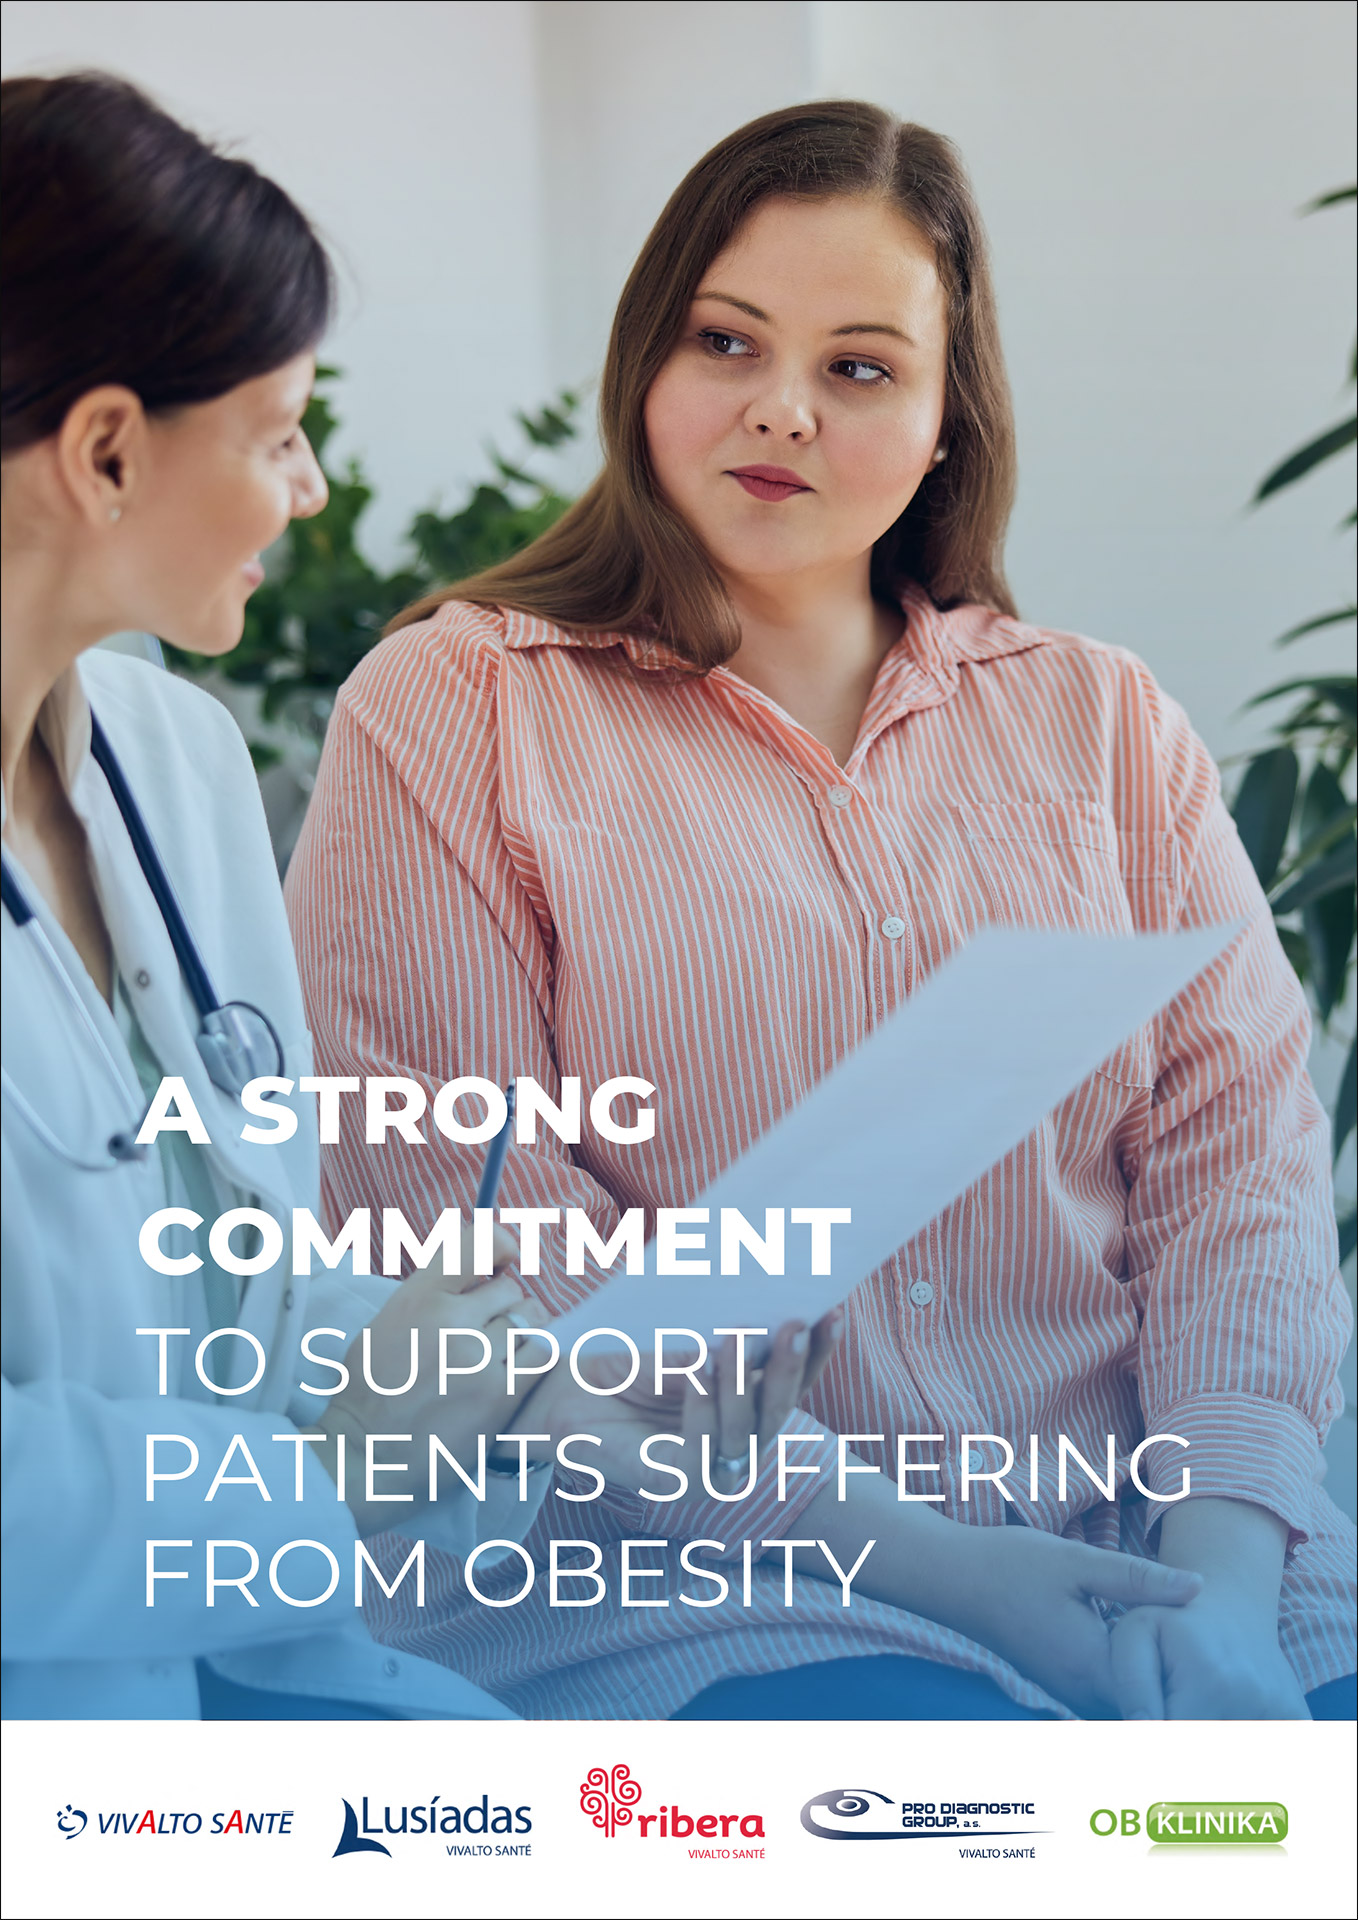 A strong commitment to support patients suffering from obesity.